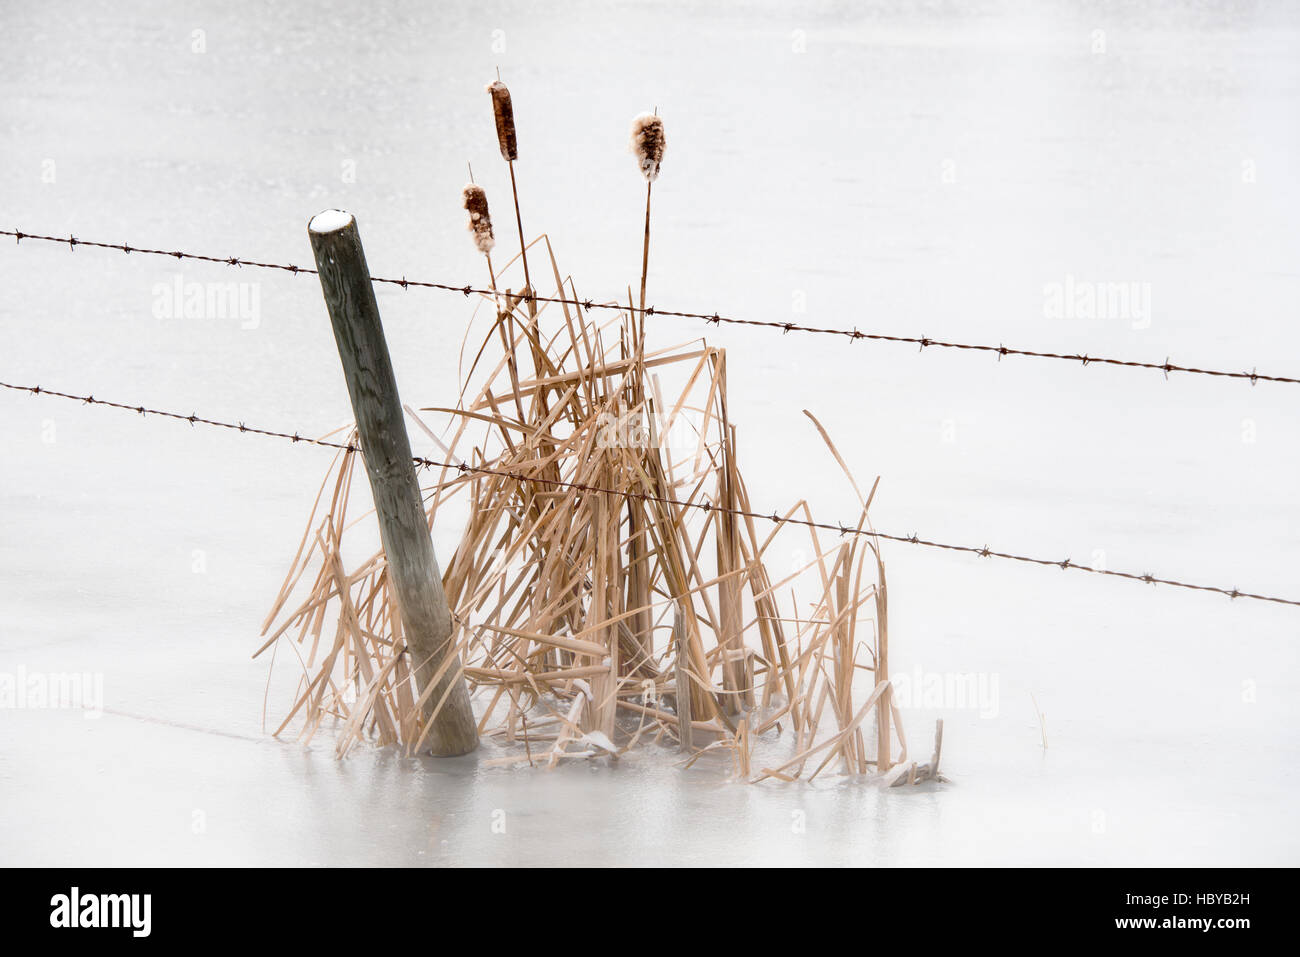 Bulrushes (cattails) beside a barbed wire fence in a frozen slough. Stock Photo